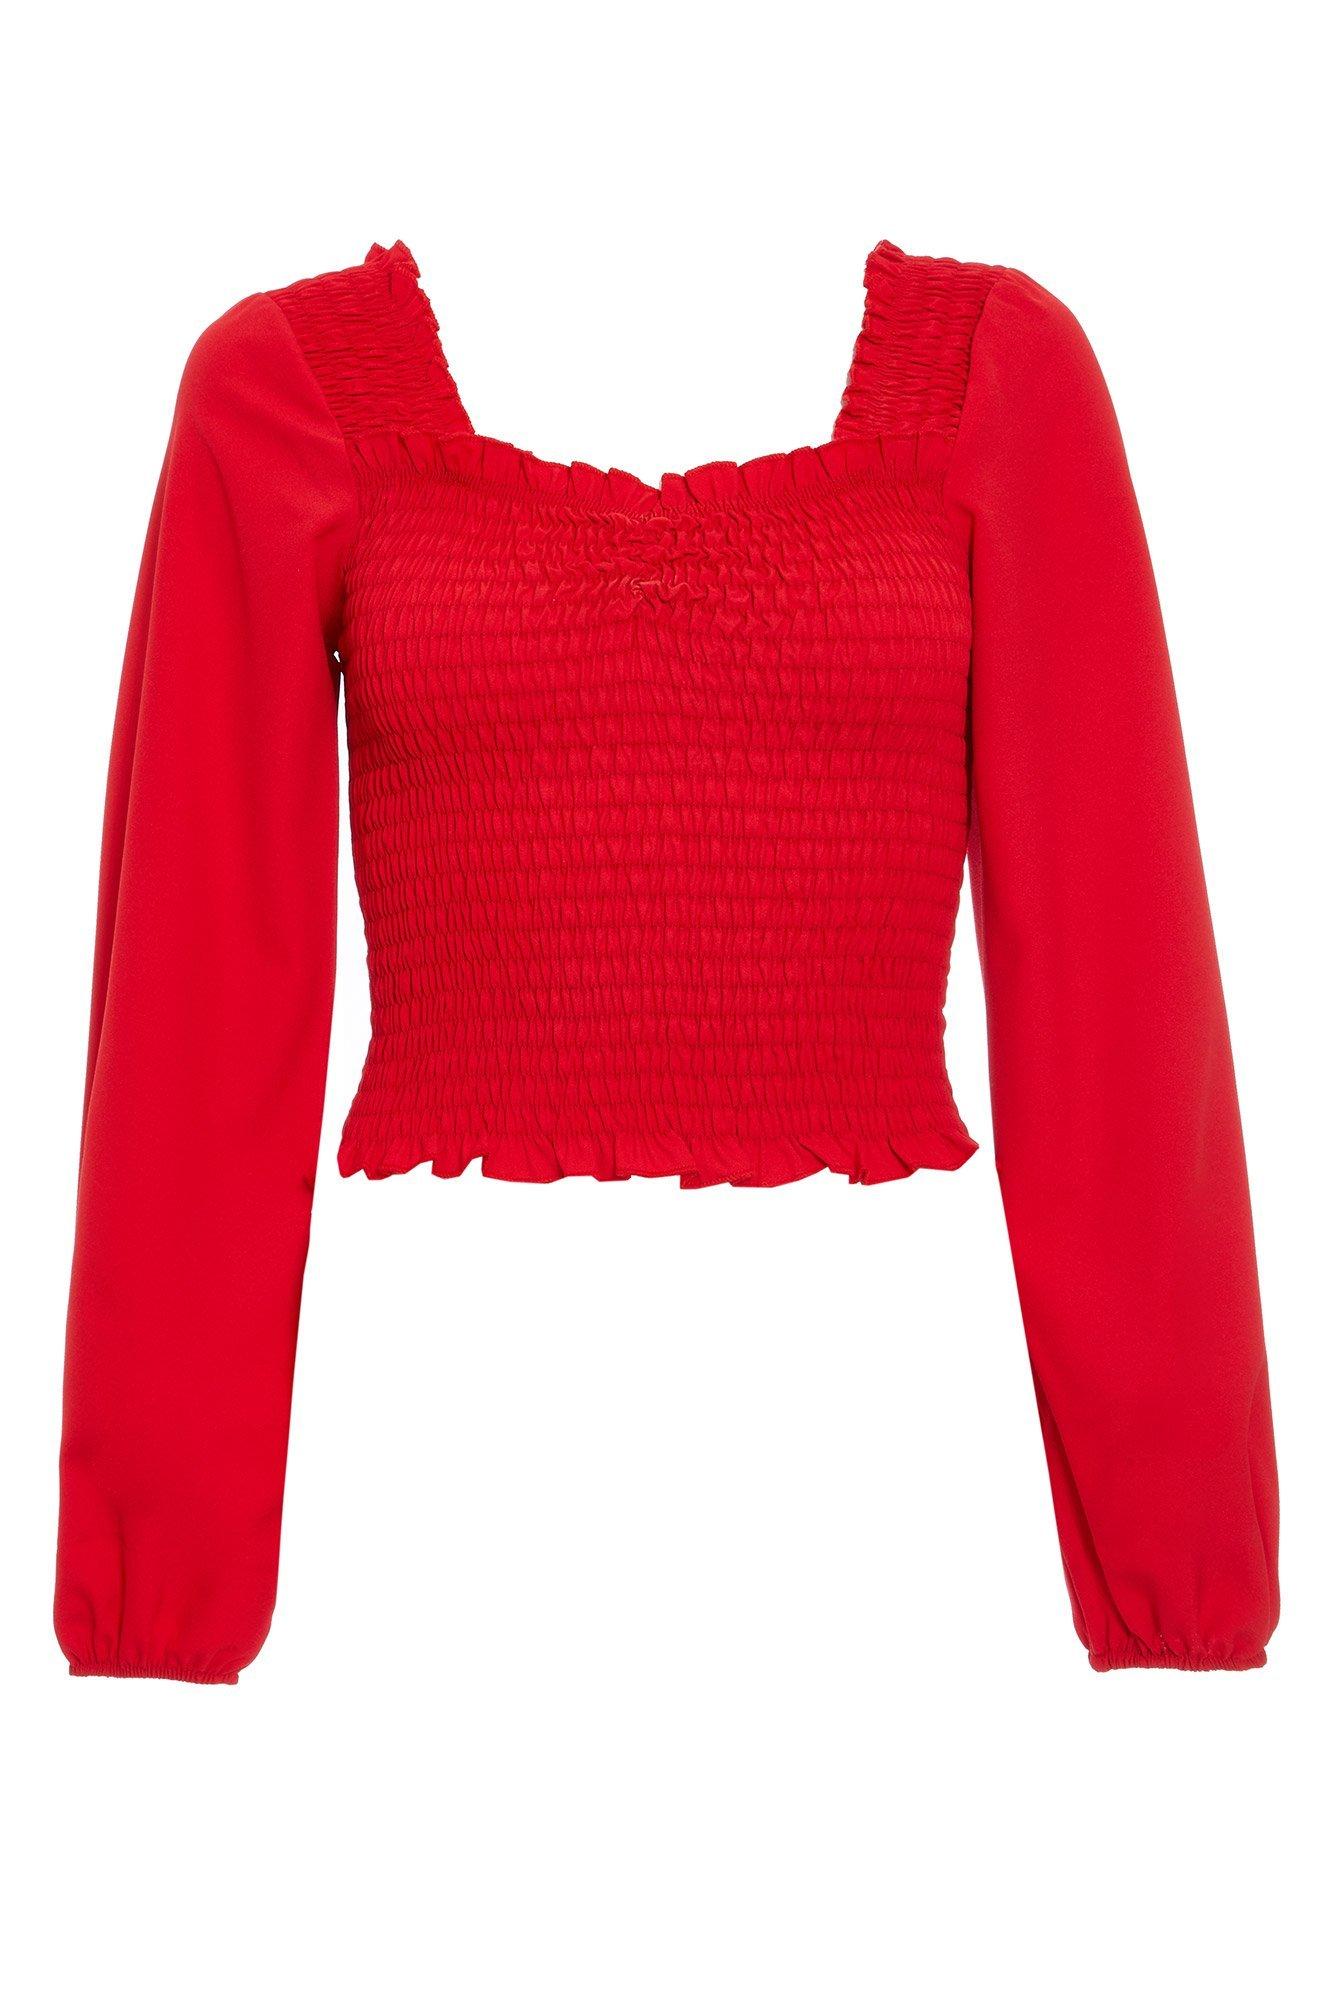 Red Long Sleeve Shirred Crop Top - Quiz Clothing